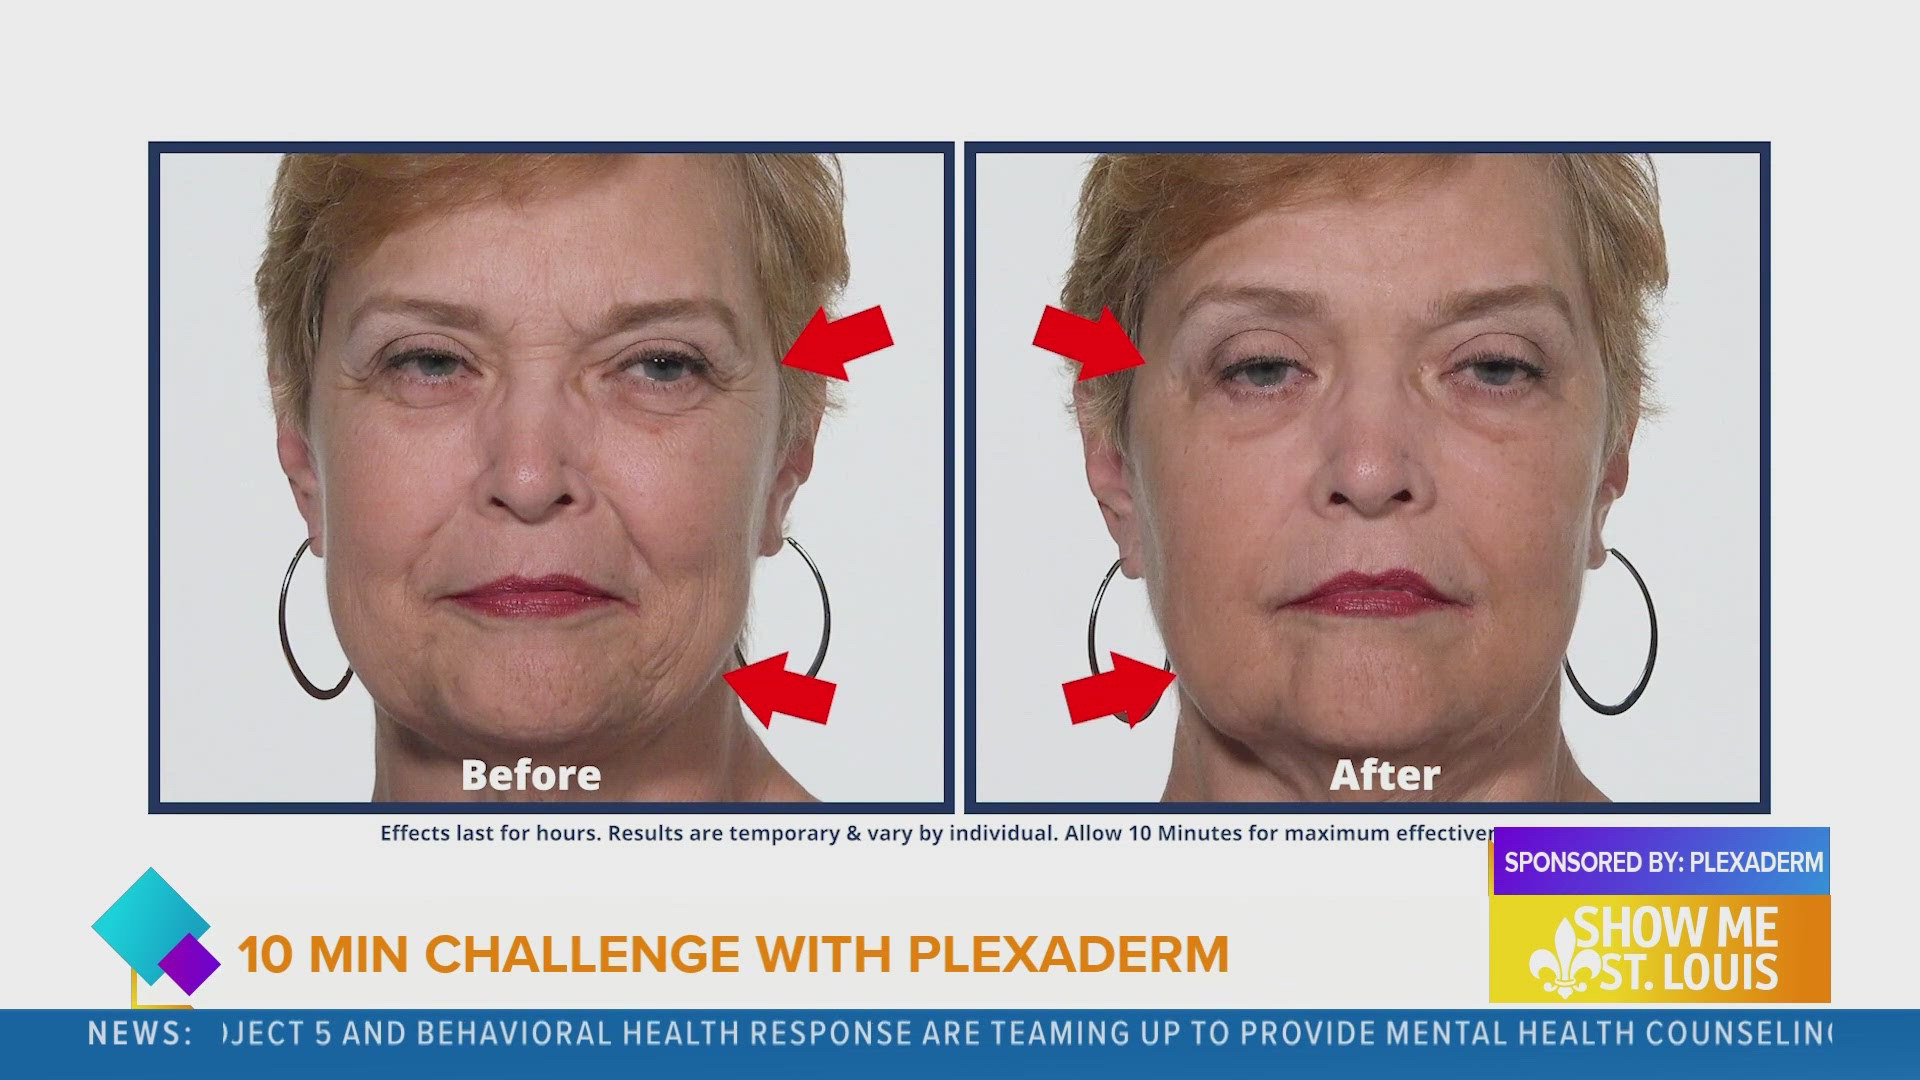 The time to try Plexaderm is now!